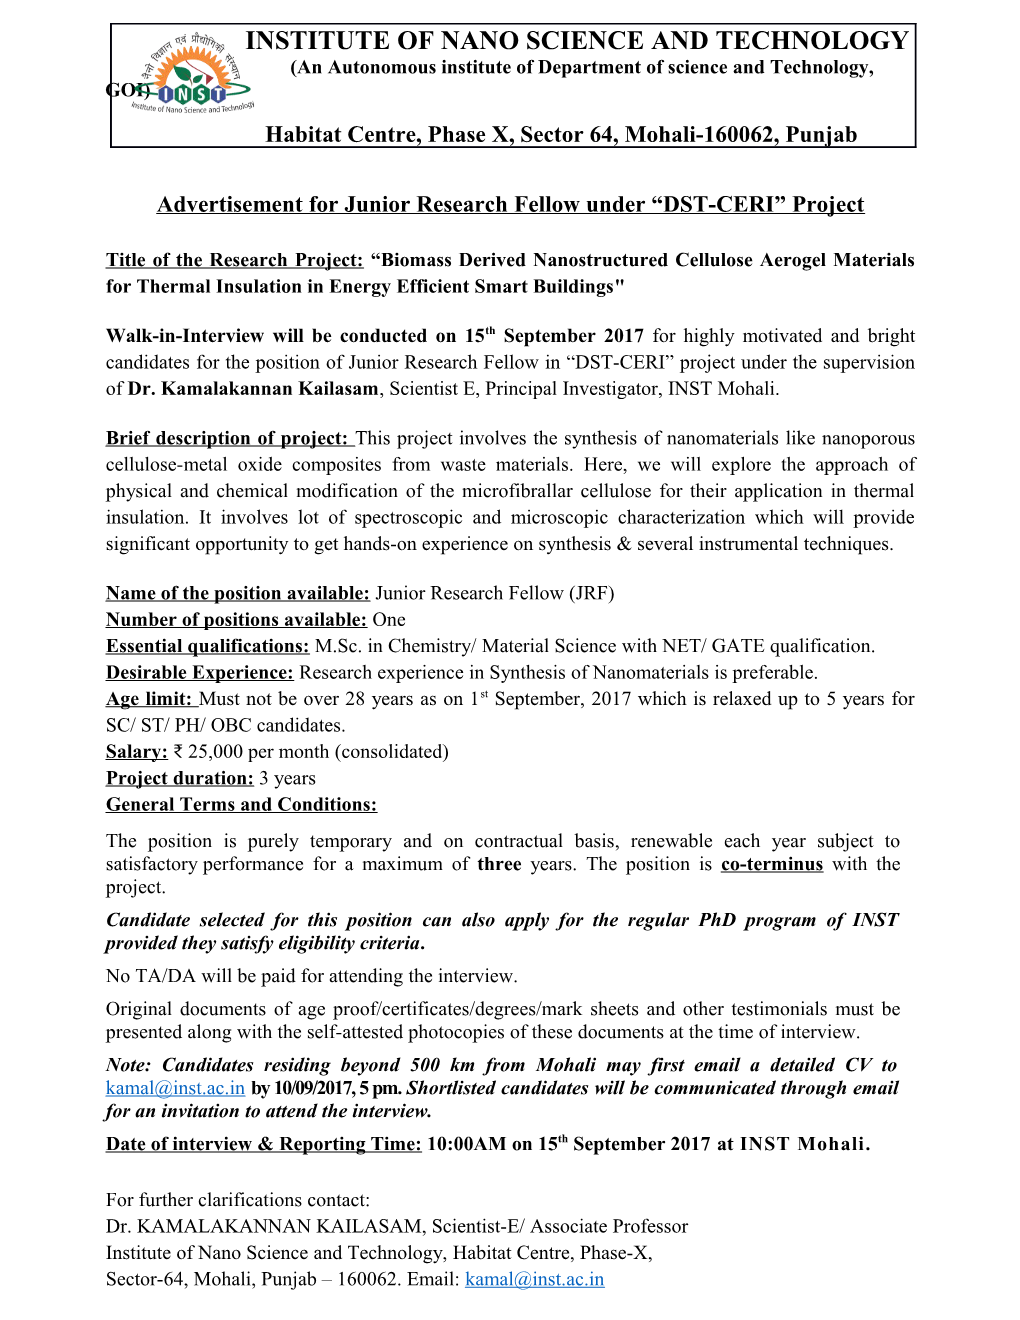 Advertisement for Junior Research Fellow Under DST-CERI Project